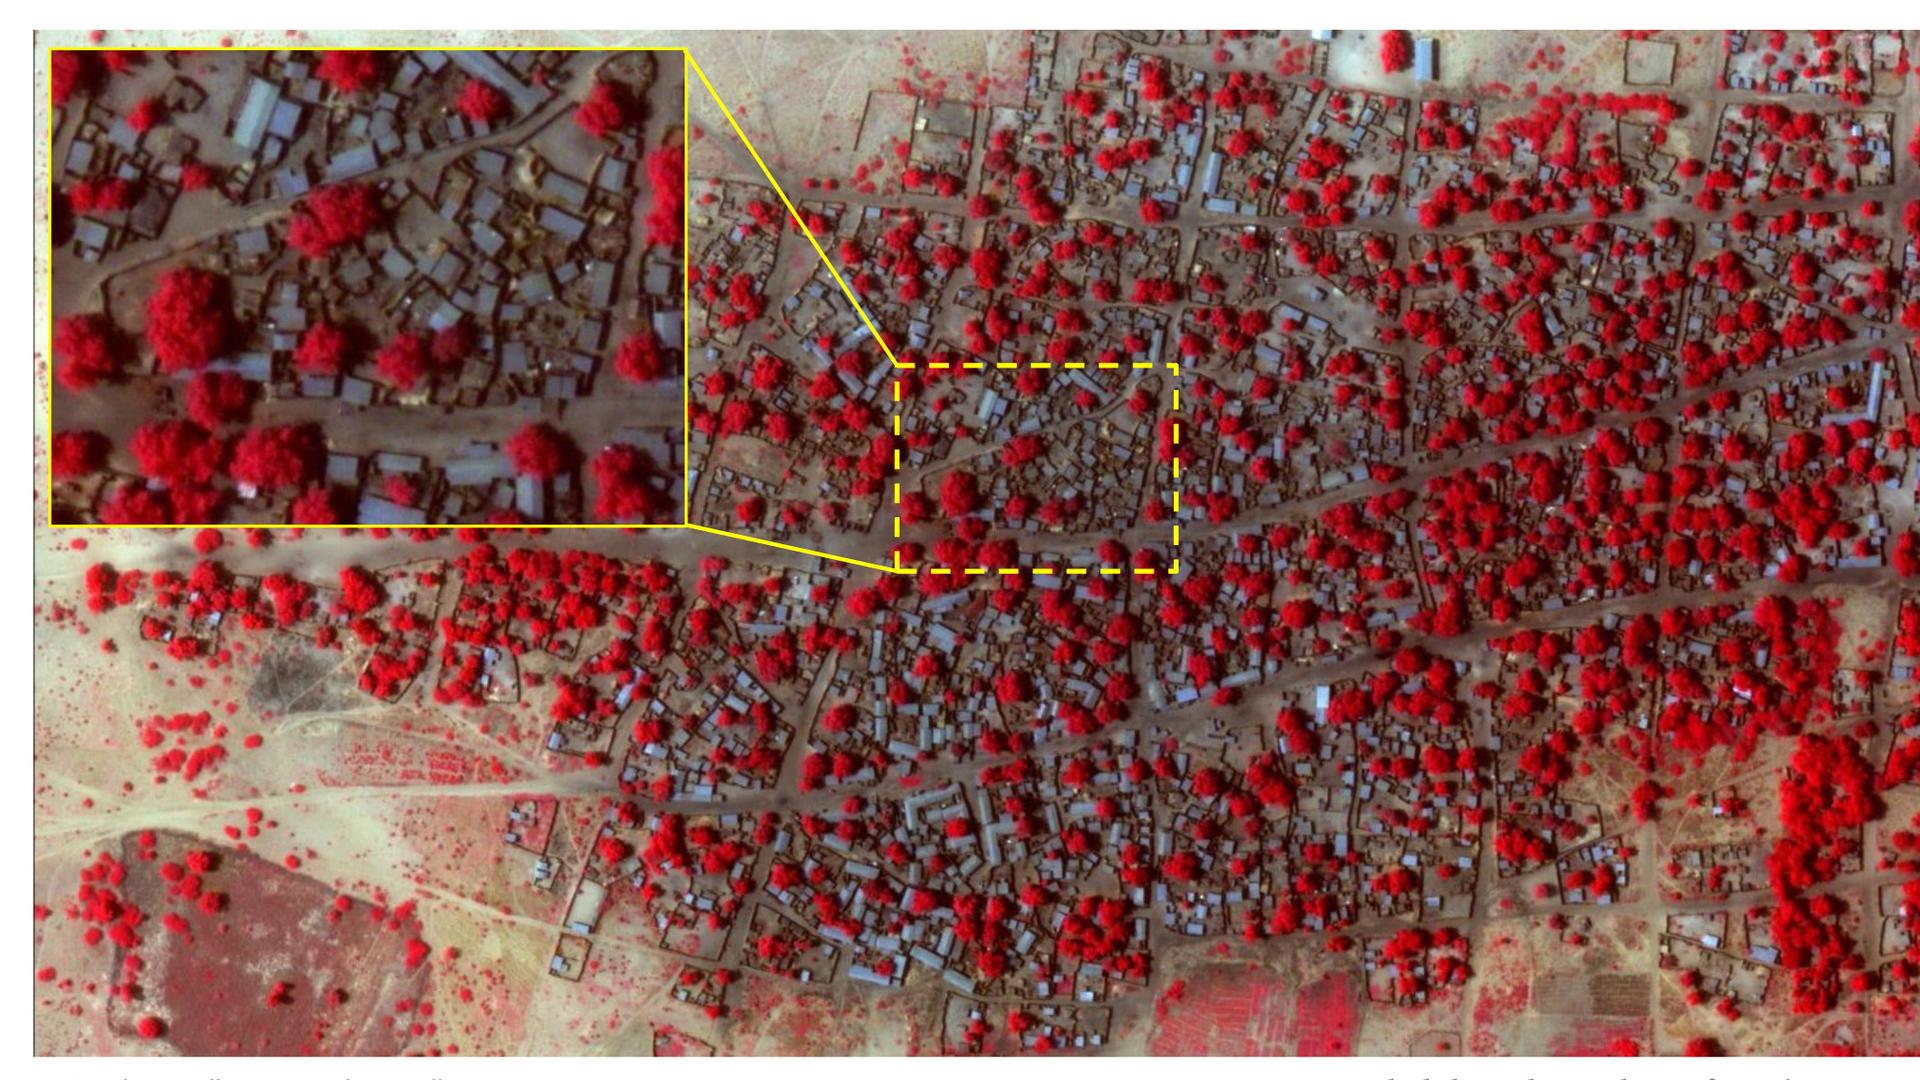 Satellite image showing the extent of damage in Doron Baga taken on January 7, 2015, following an attack by Boko Haram.